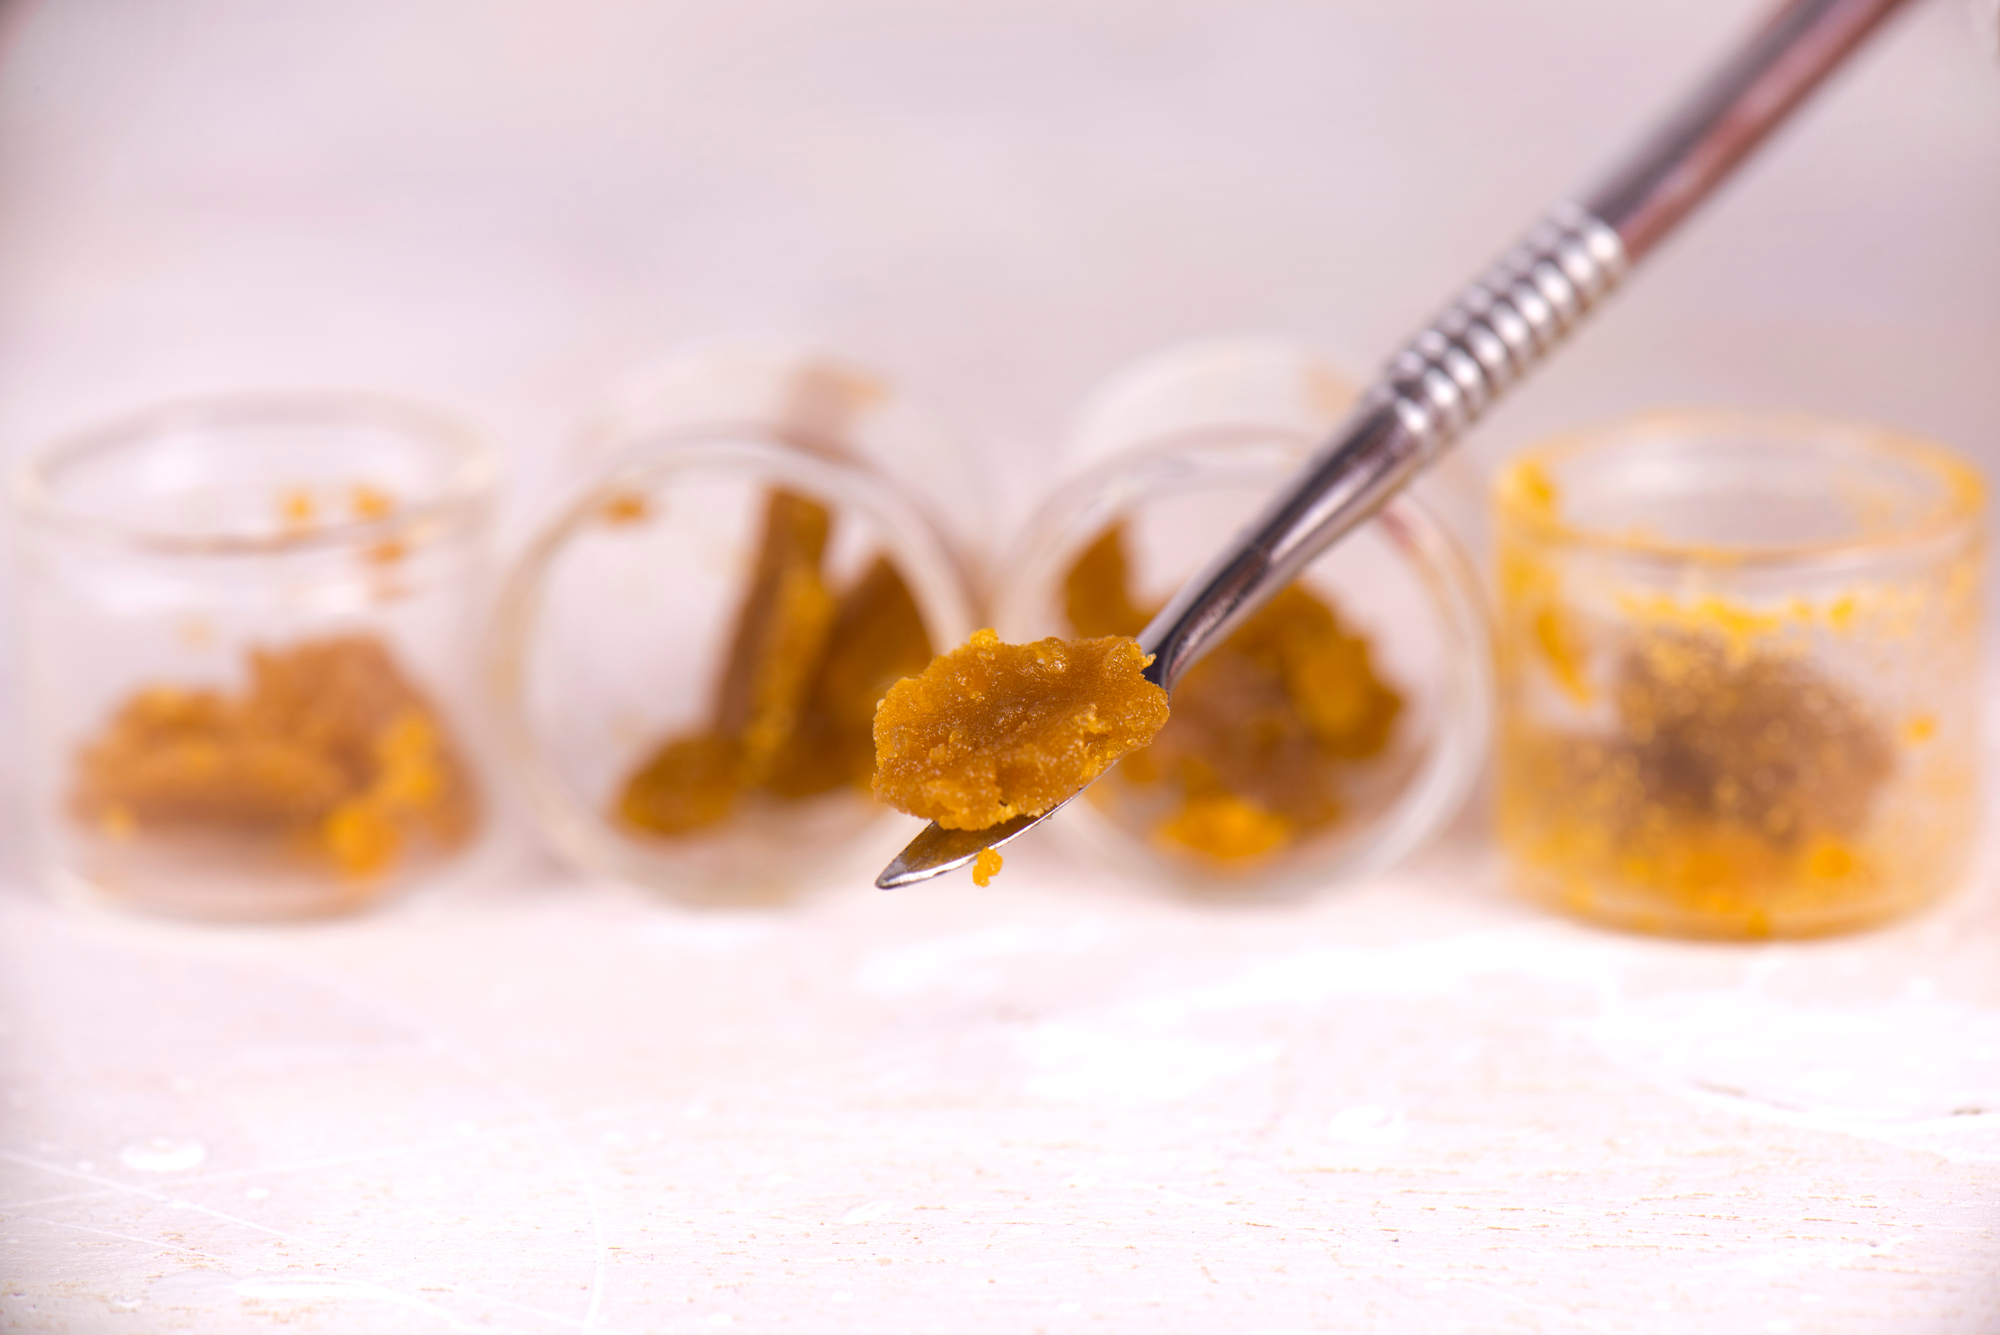 Live resin vs other cannabis concentrates